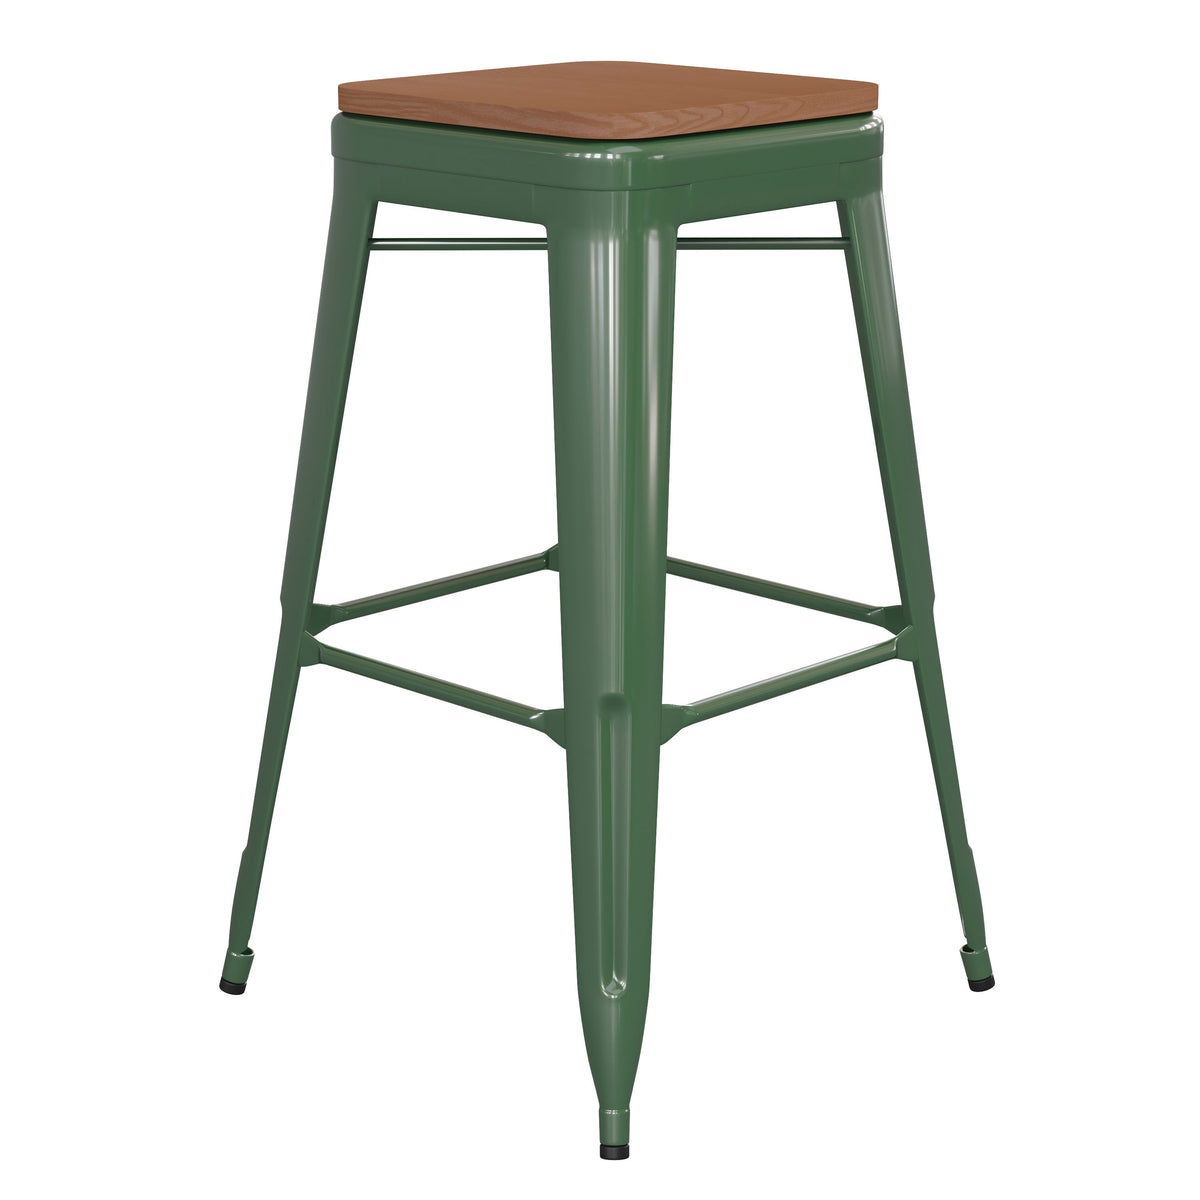 Green/Teak |#| Indoor/Outdoor Backless Bar Stool with Poly Seat - Green/Teak